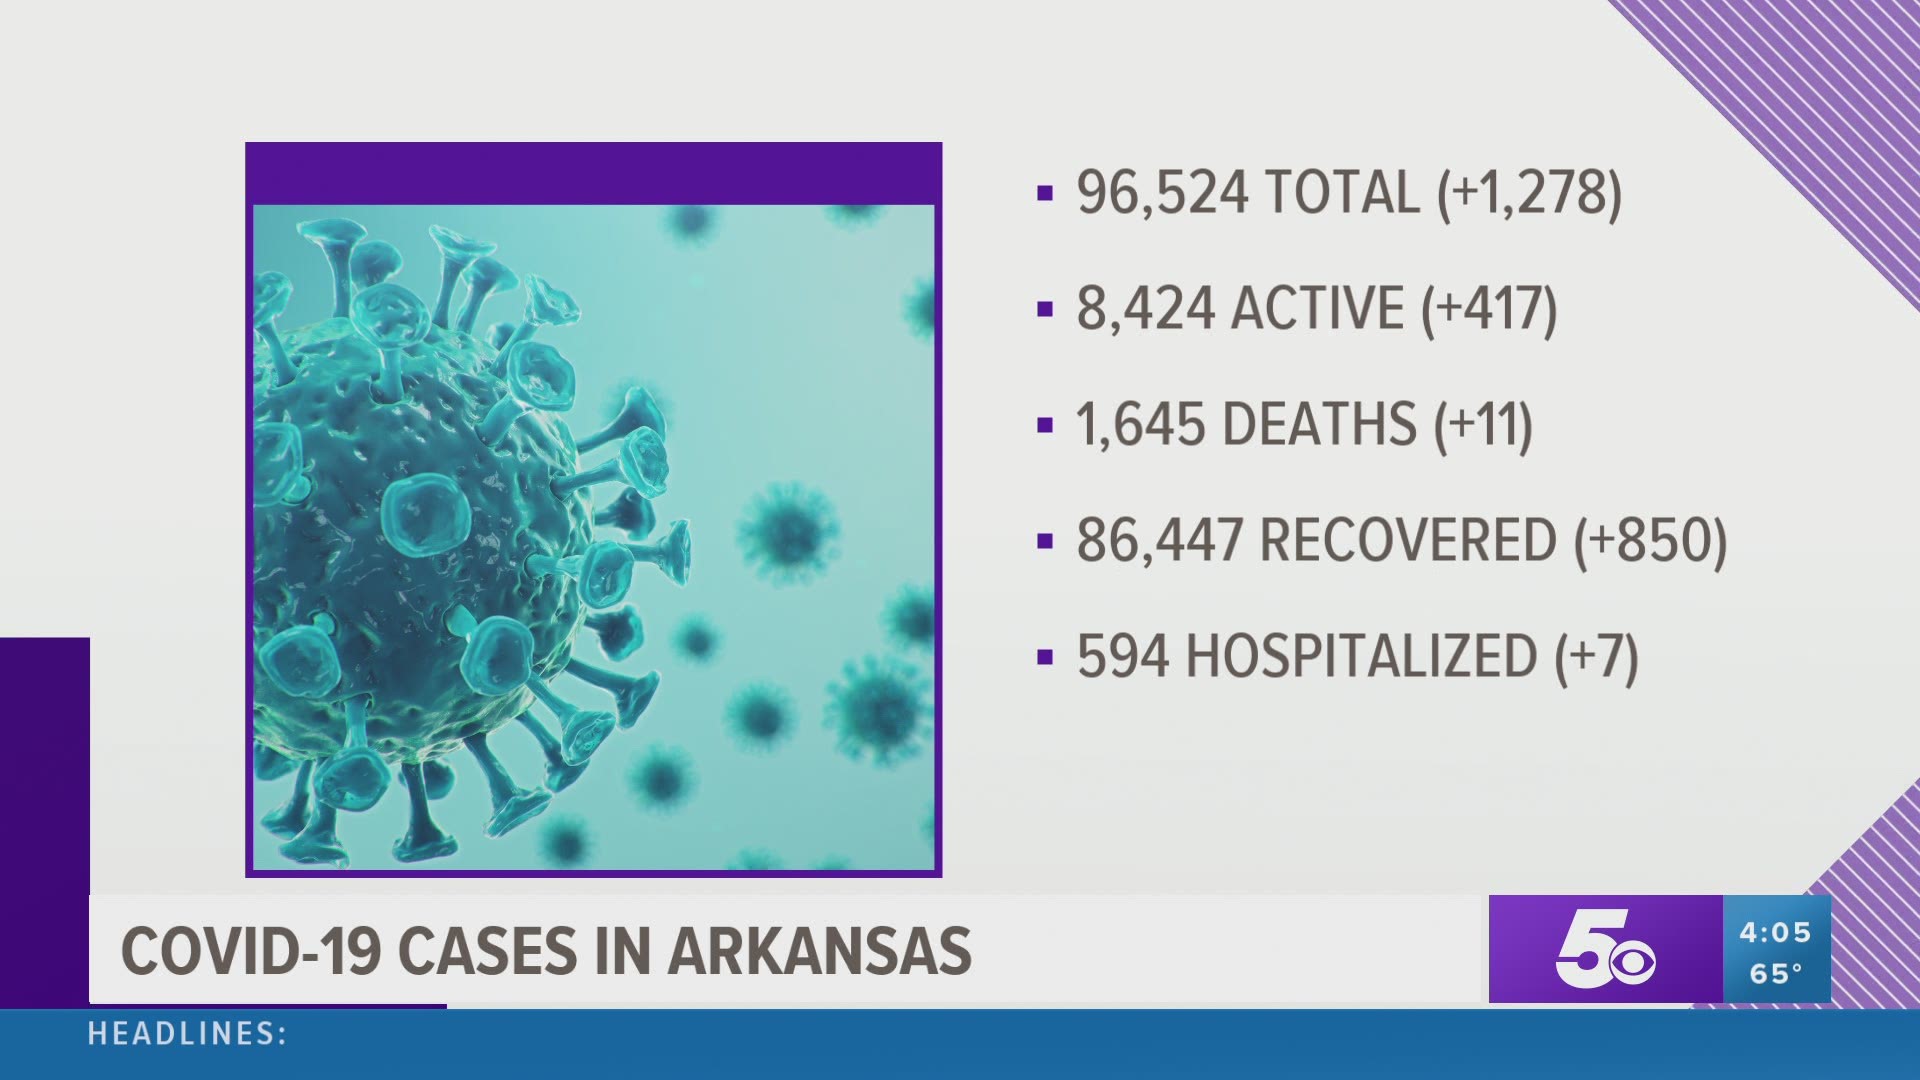 A look at the latest case numbers for the coronavirus in Arkansas on Thursday, October 15. https://bit.ly/3iqGRnx